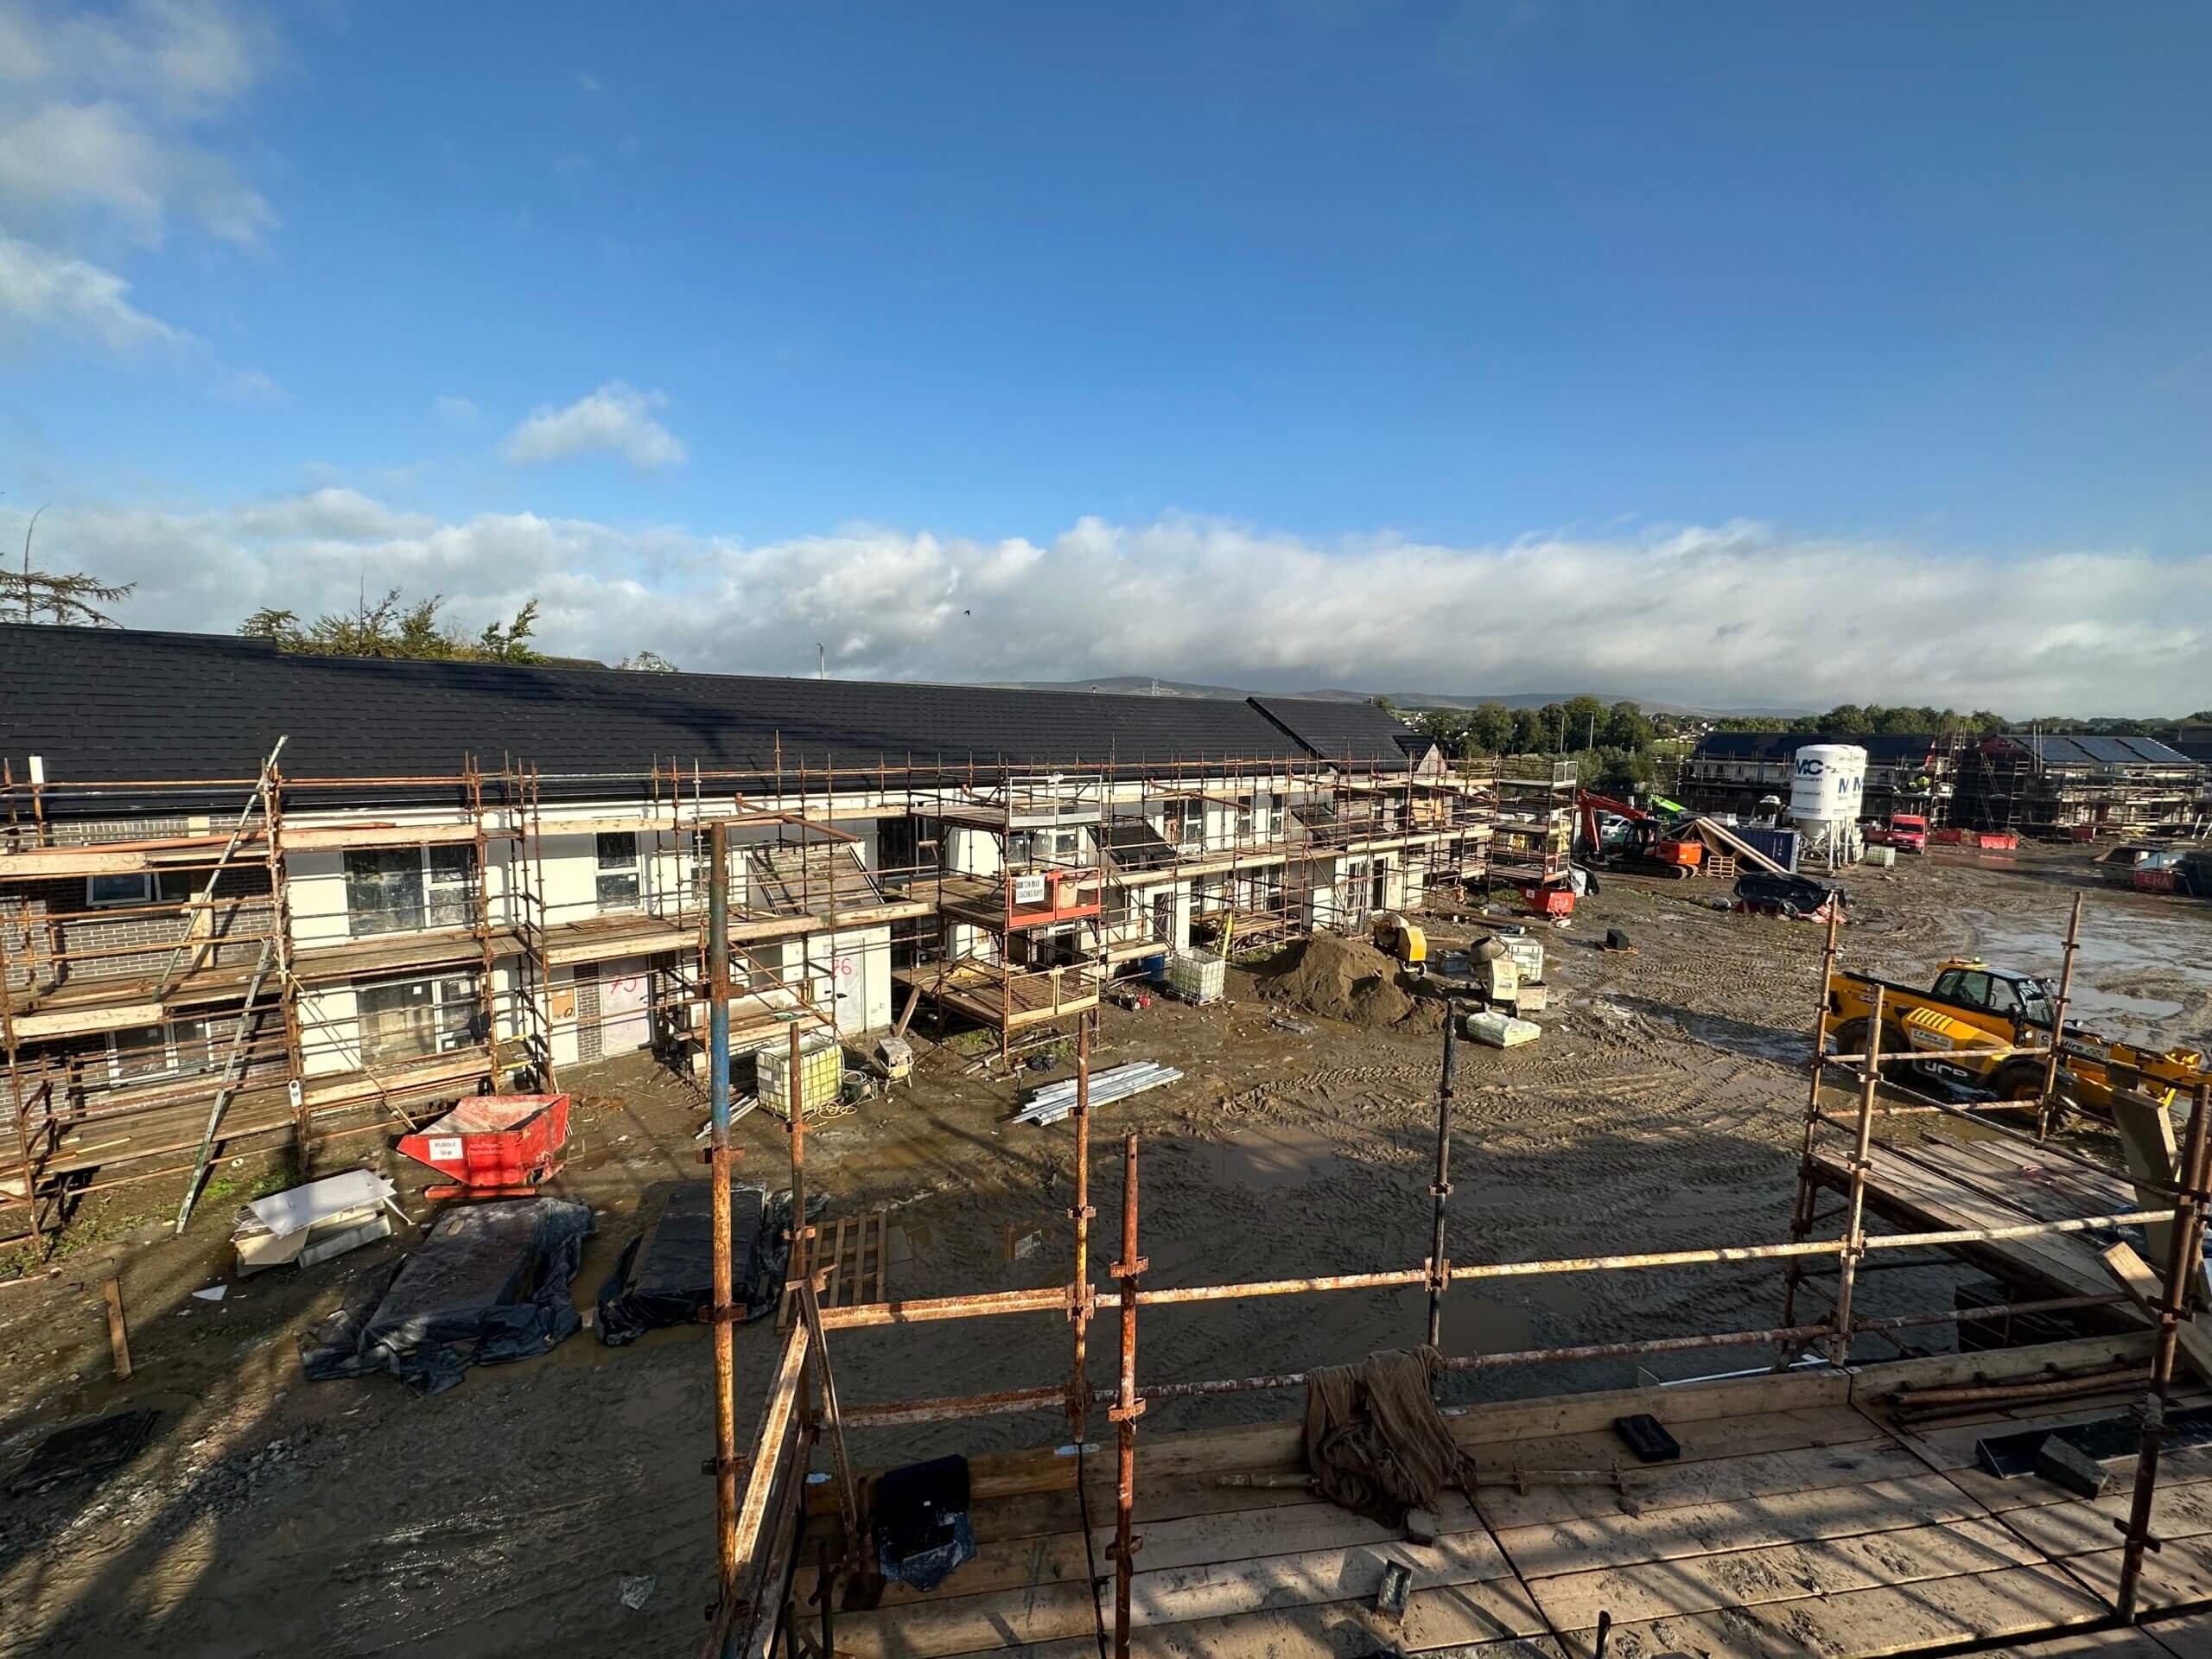 20230925 084925511 iOS scaled - Project Update: Buncrana Road, Derry